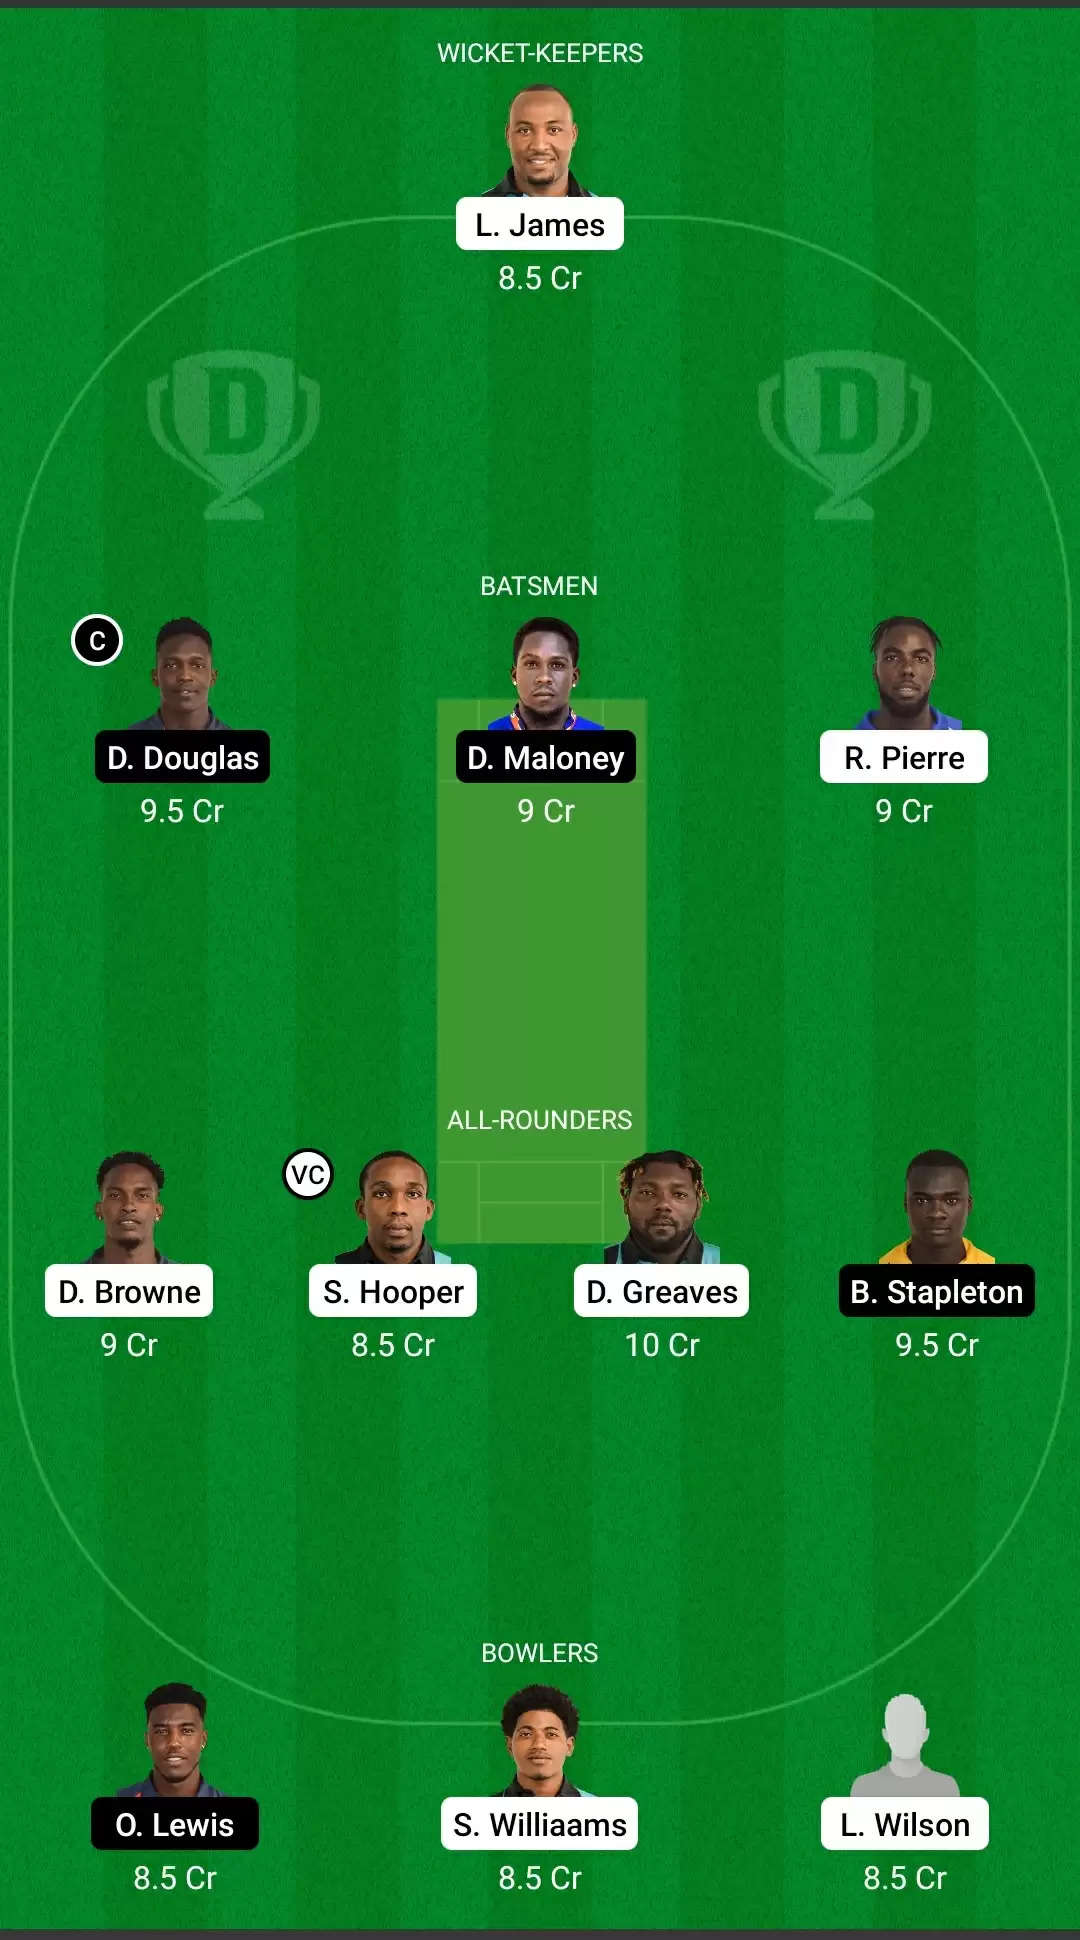 Vincy Premier League 2021, Qualifier 1: DVE vs LSH Dream11 Prediction, Fantasy Cricket Tips, Team, Playing 11, Pitch Report, Weather Conditions and Injury Update